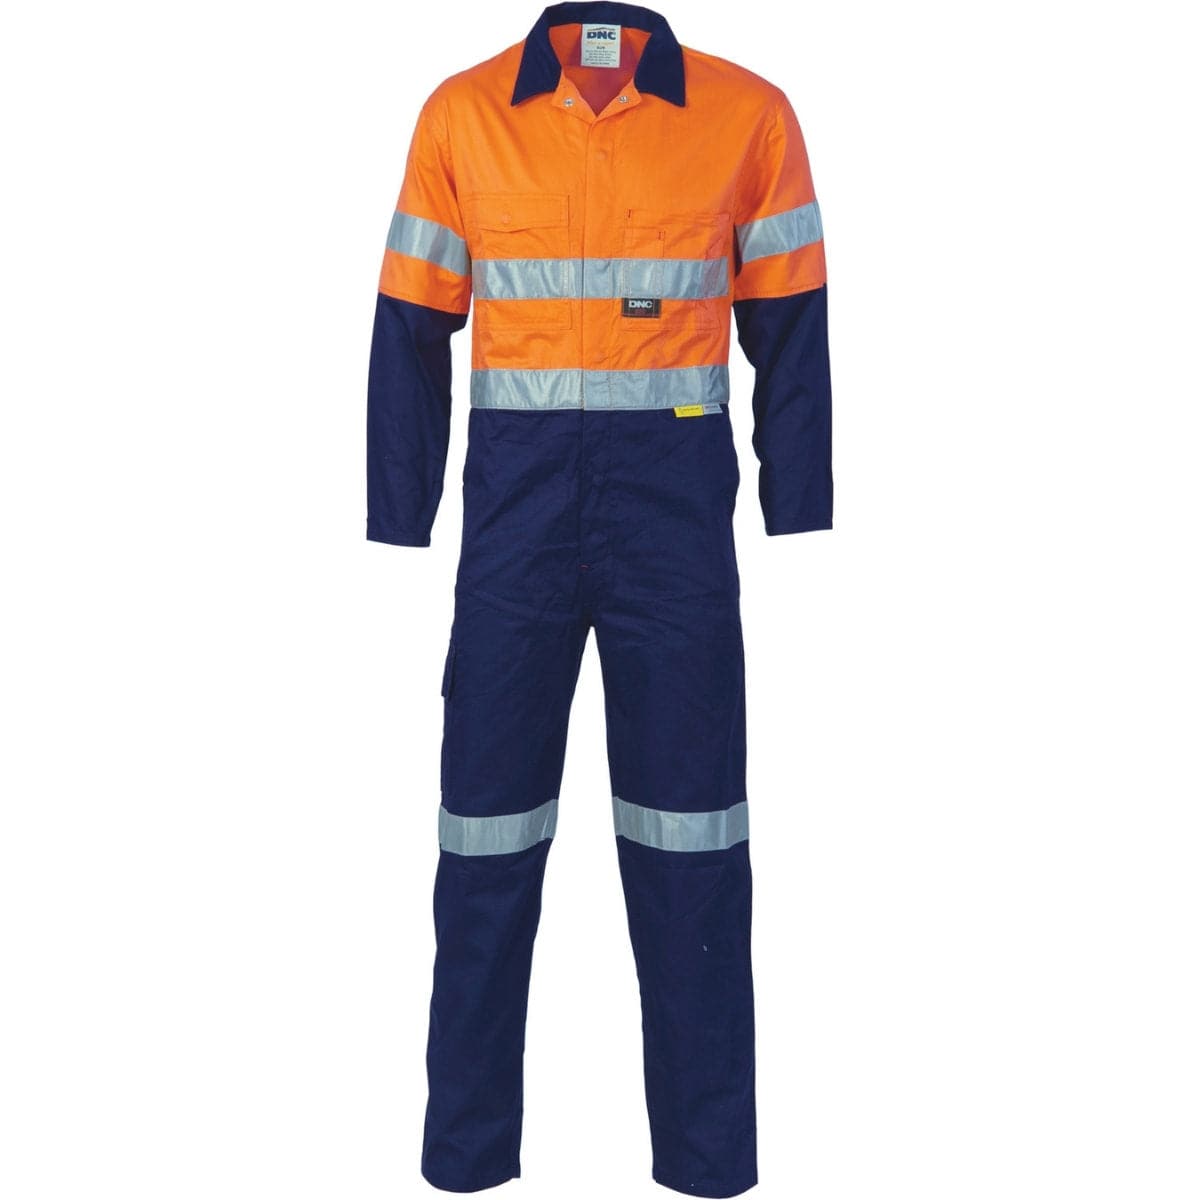 DNC HiVis Two Tone Cotton Coverall with 3M Reflective Tape 3855